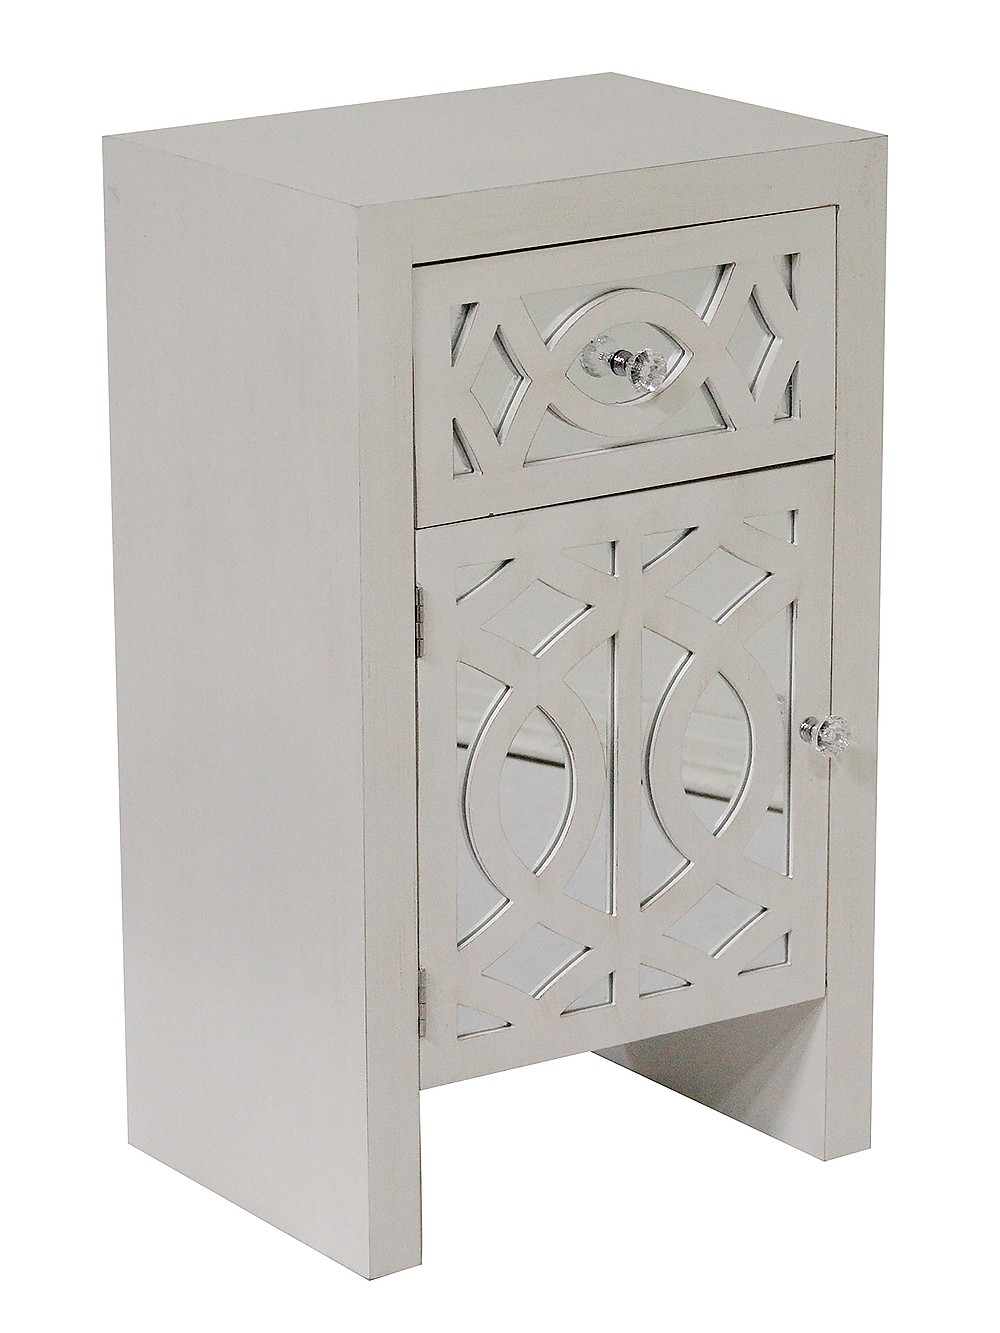 18" X 13" X 30.5" Antique White MDF Wood Mirrored Glass Accent Cabinet with Mirrored Glass Door and Drawer